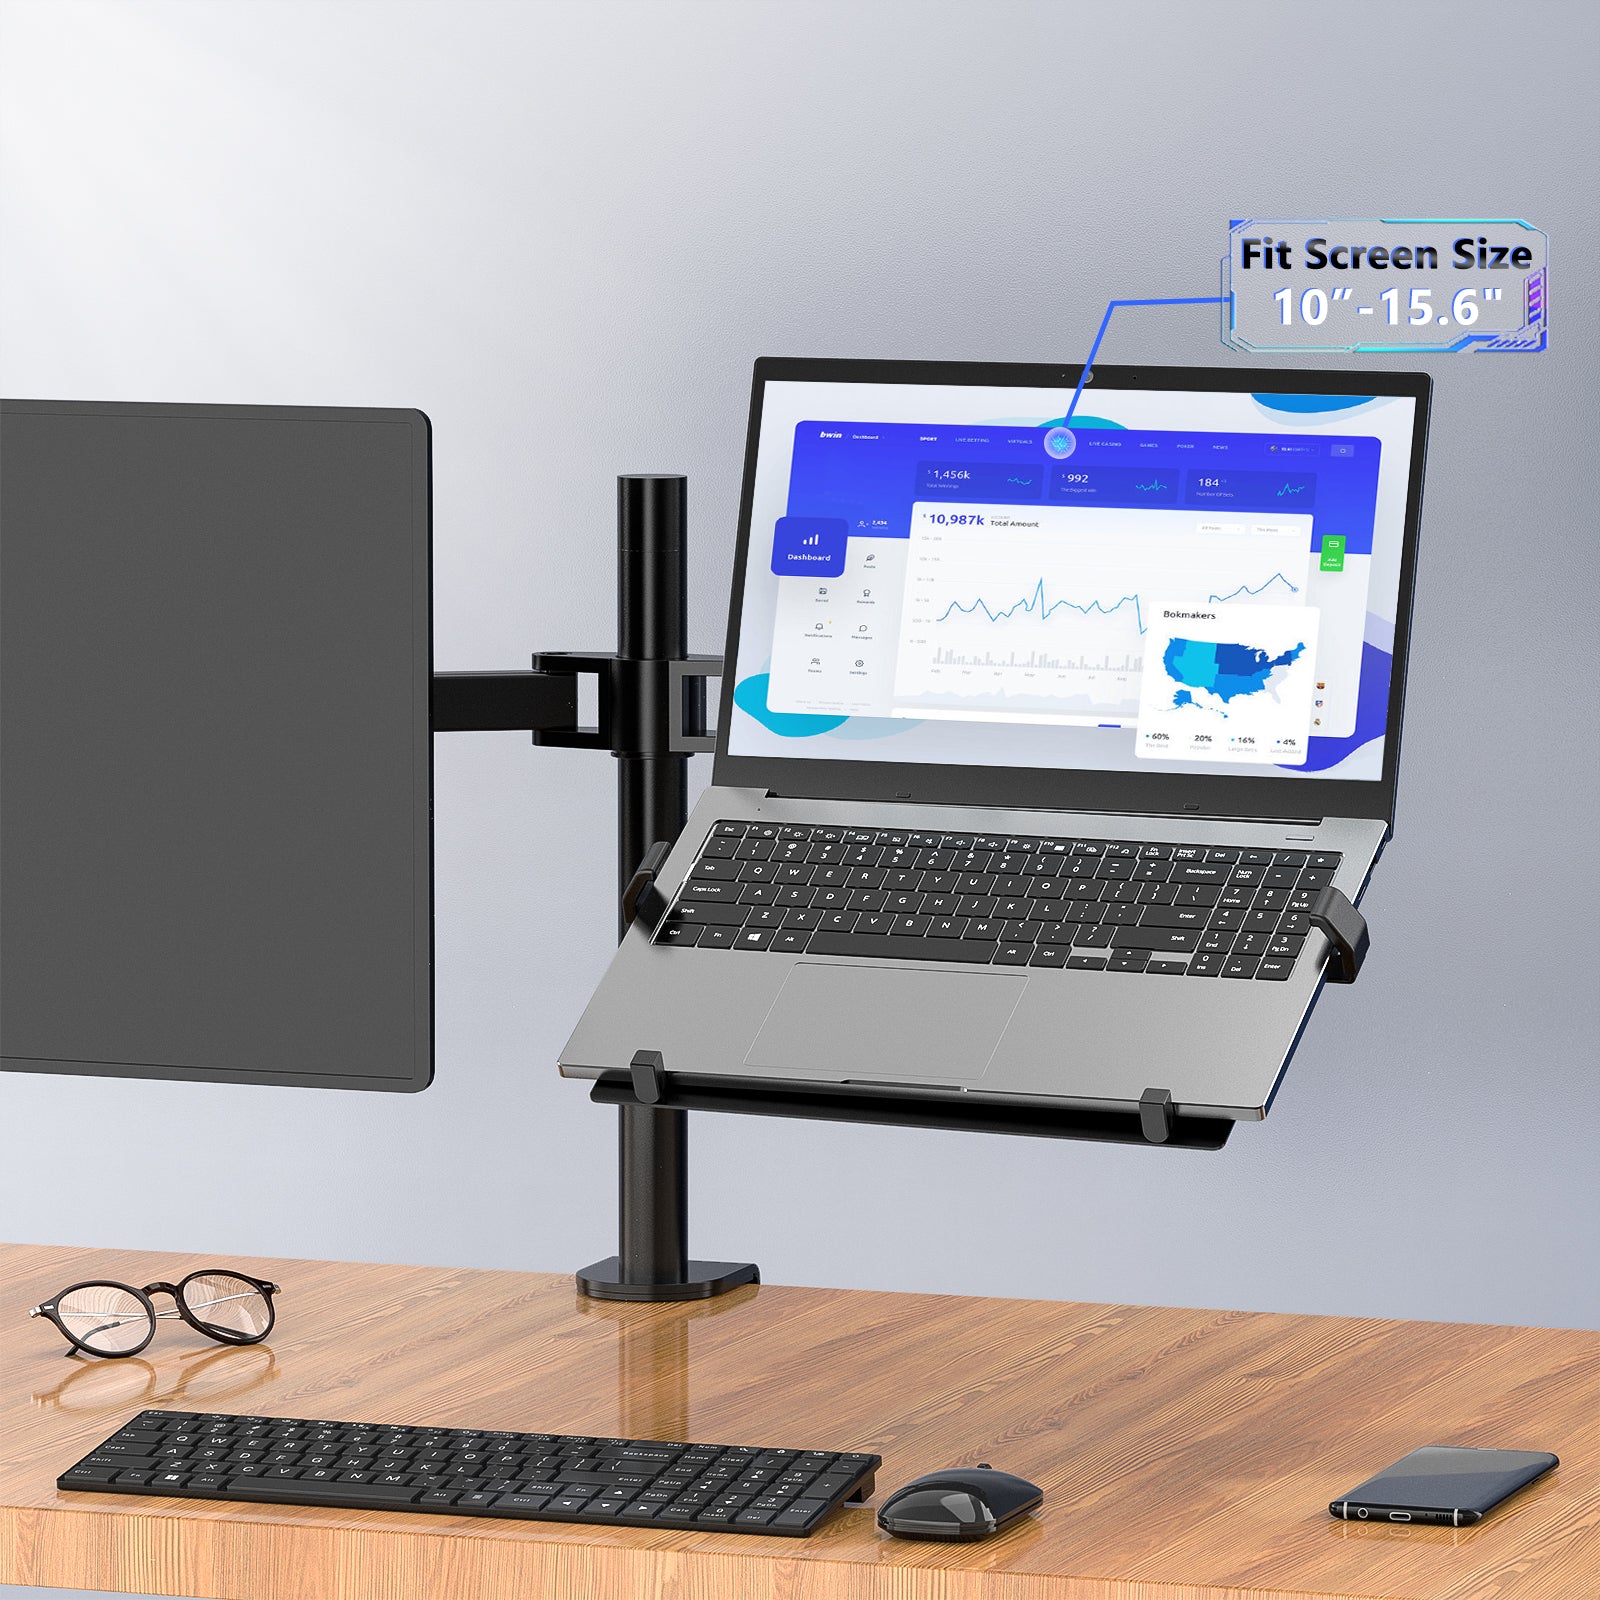 WALI Monitor Laptop Mount Stand, Laptop Tray up to 15.6 inch